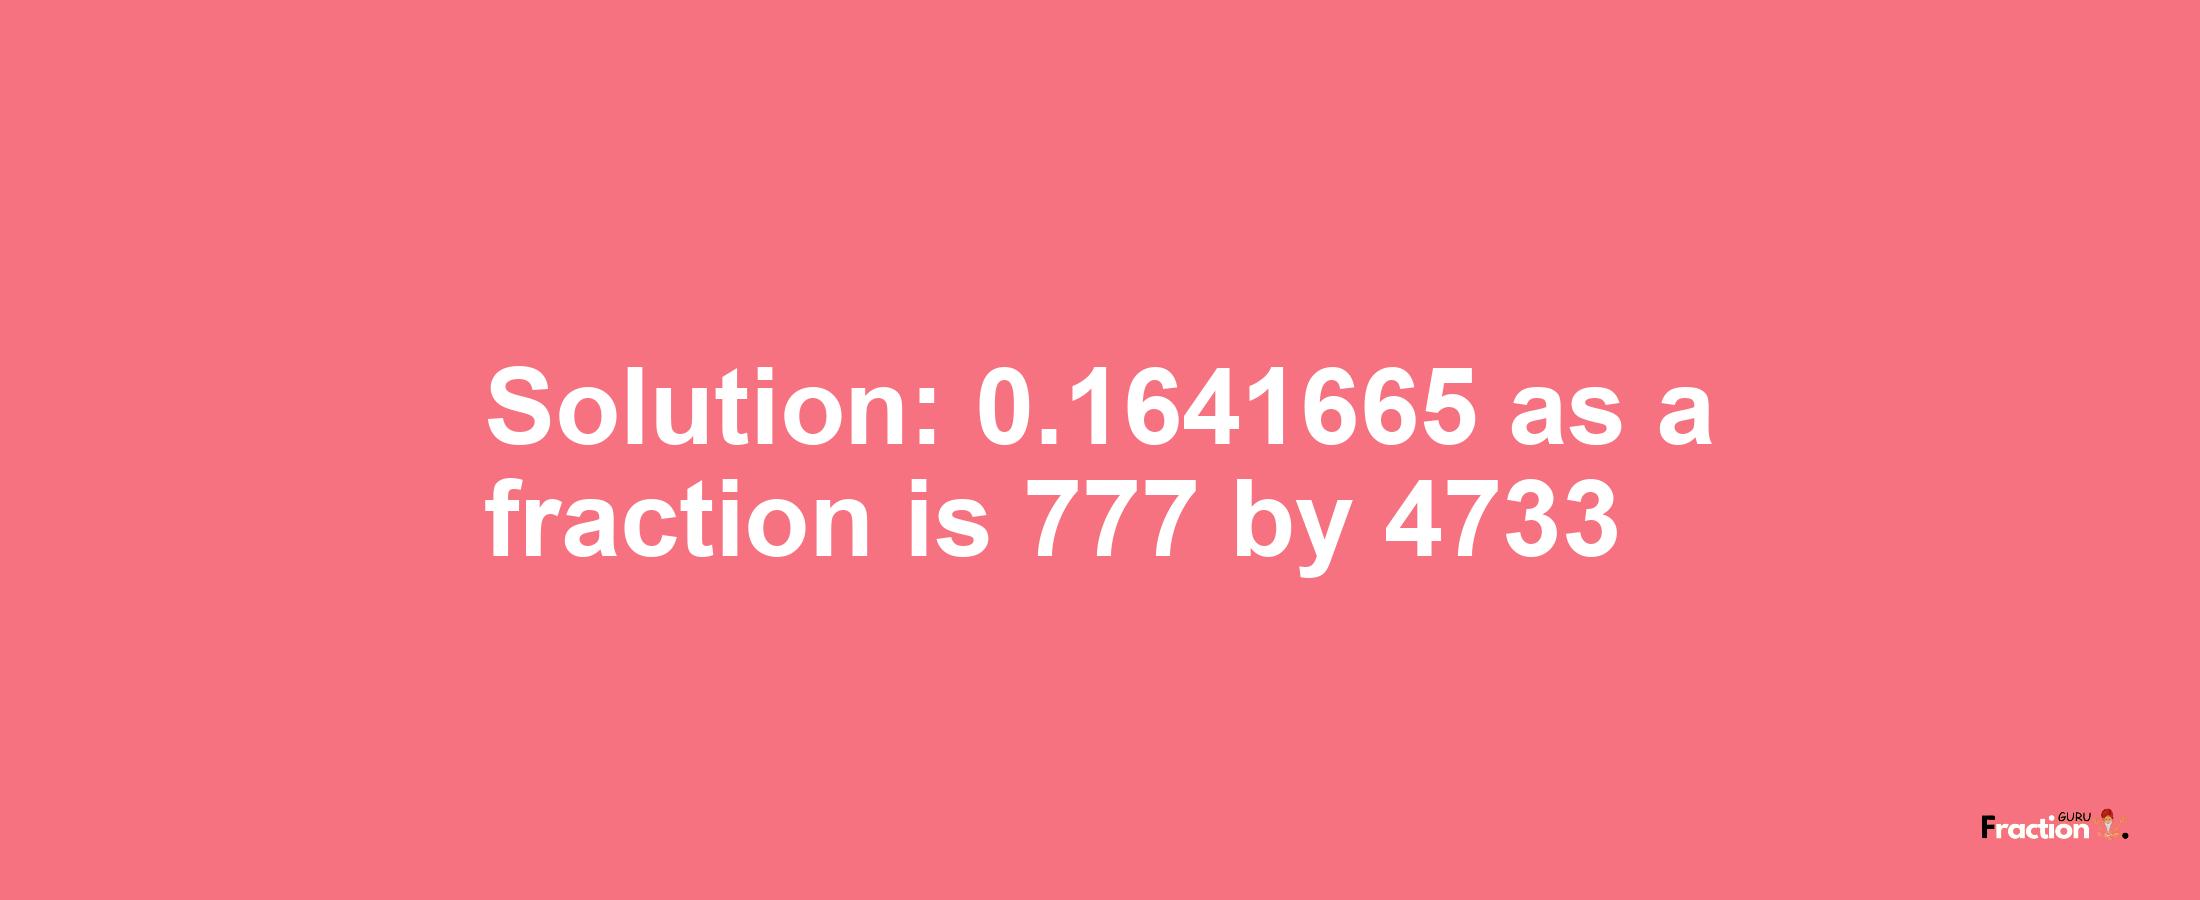 Solution:0.1641665 as a fraction is 777/4733